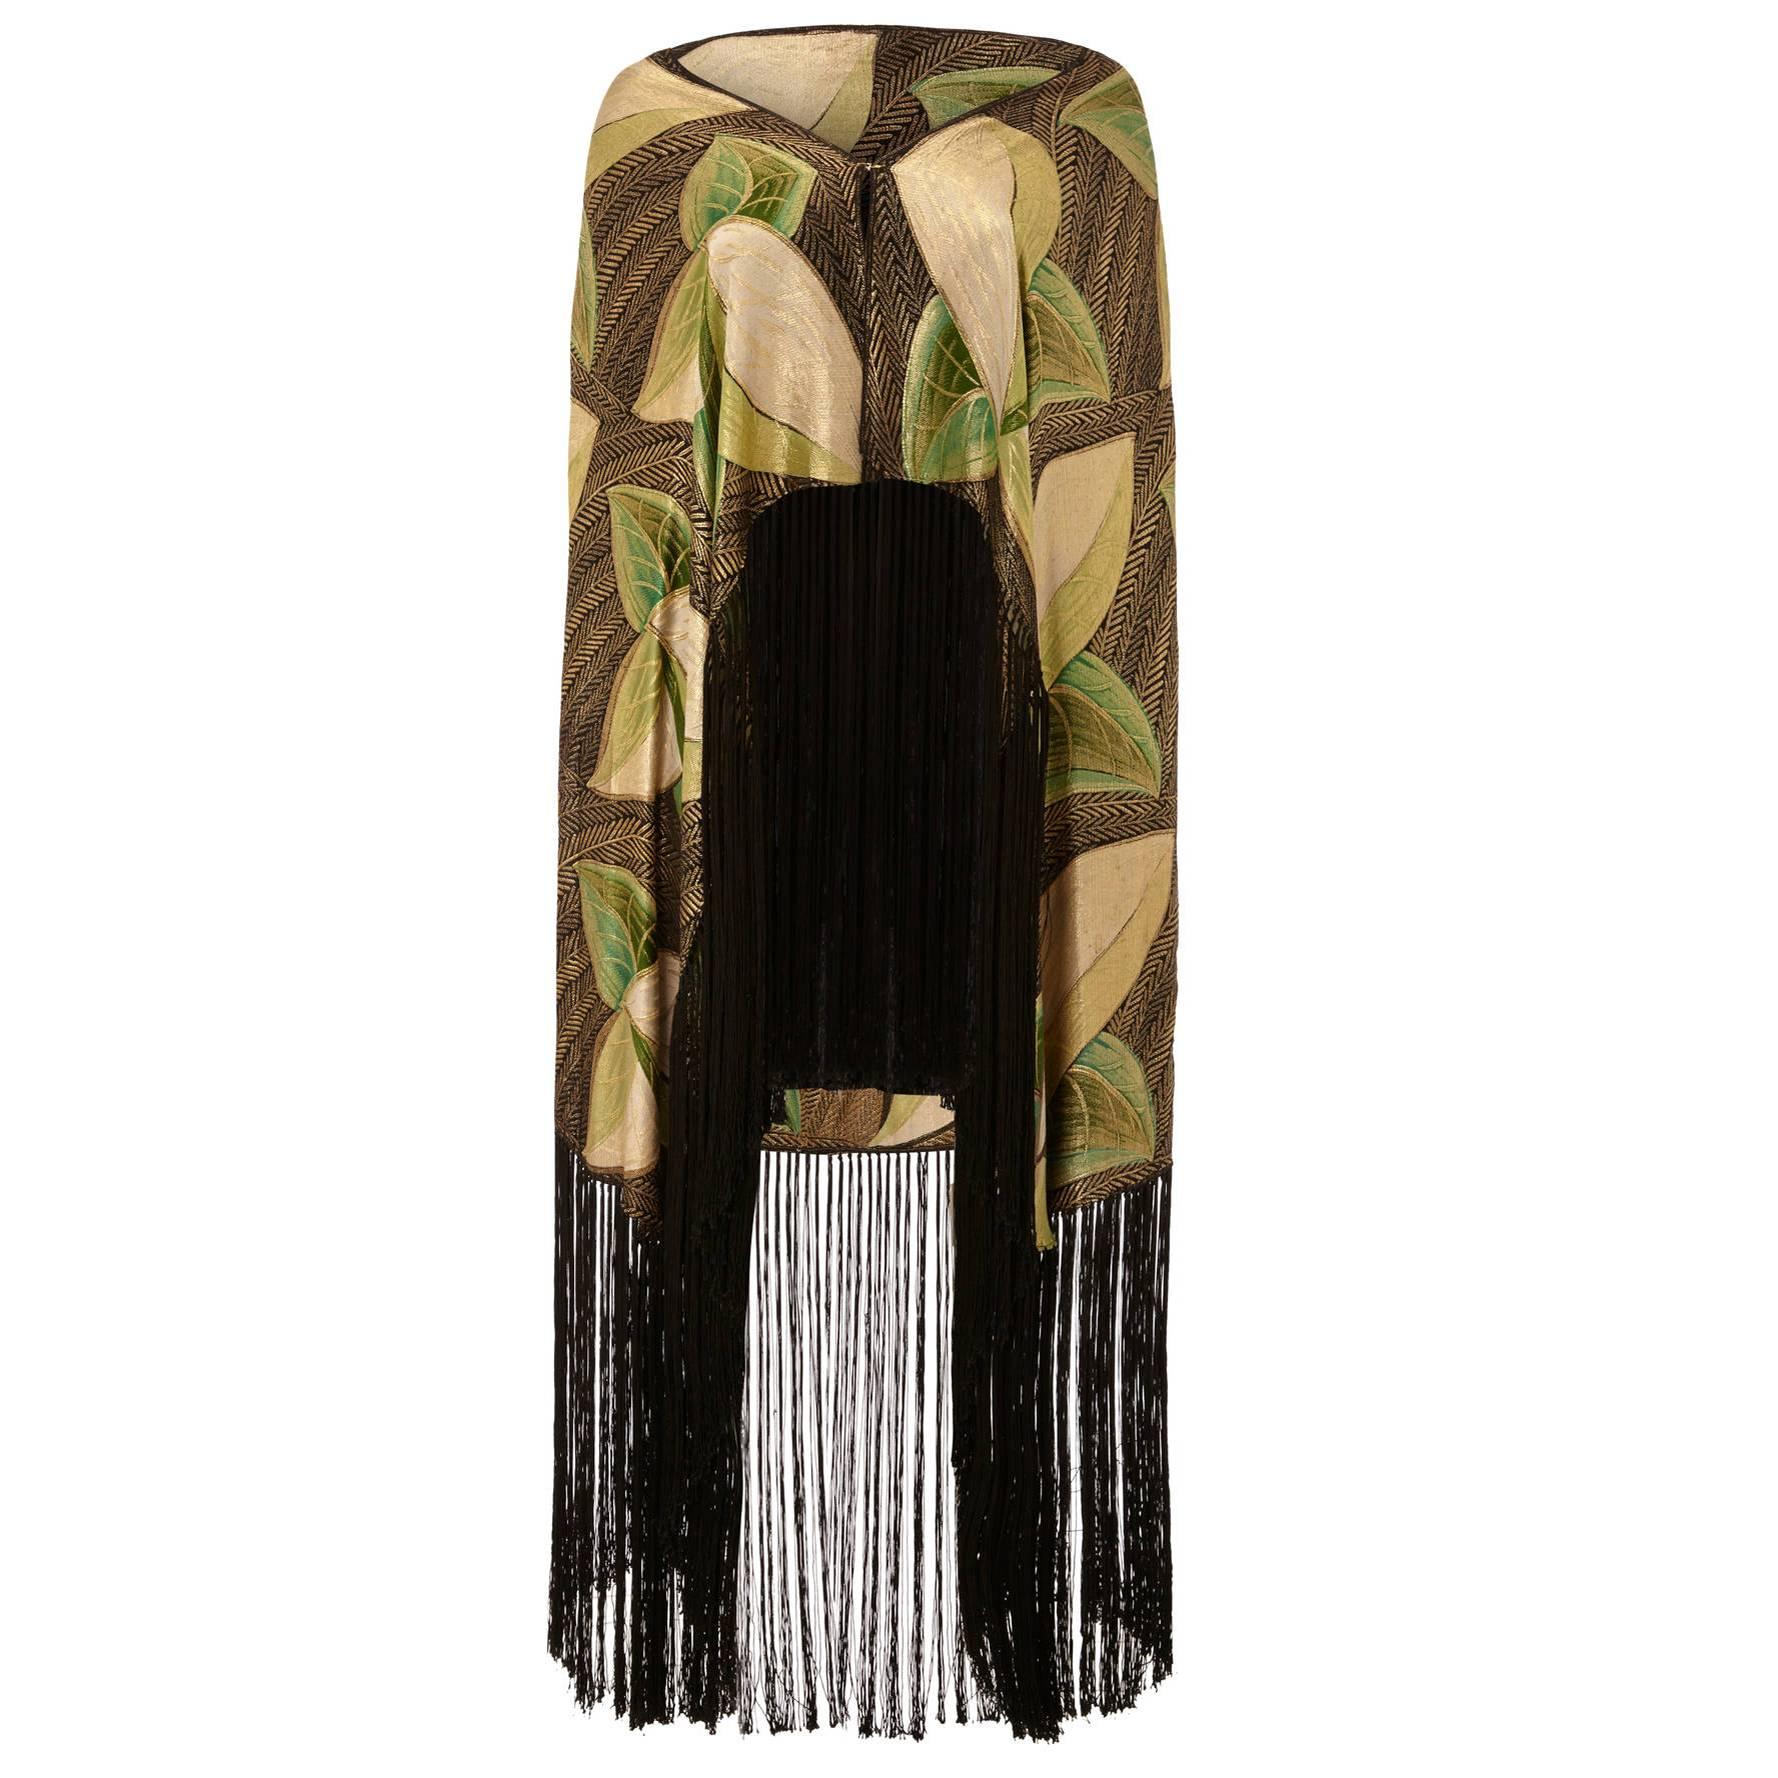 1920s/1930s Lame Scarf with Leaf Motif and Tassels